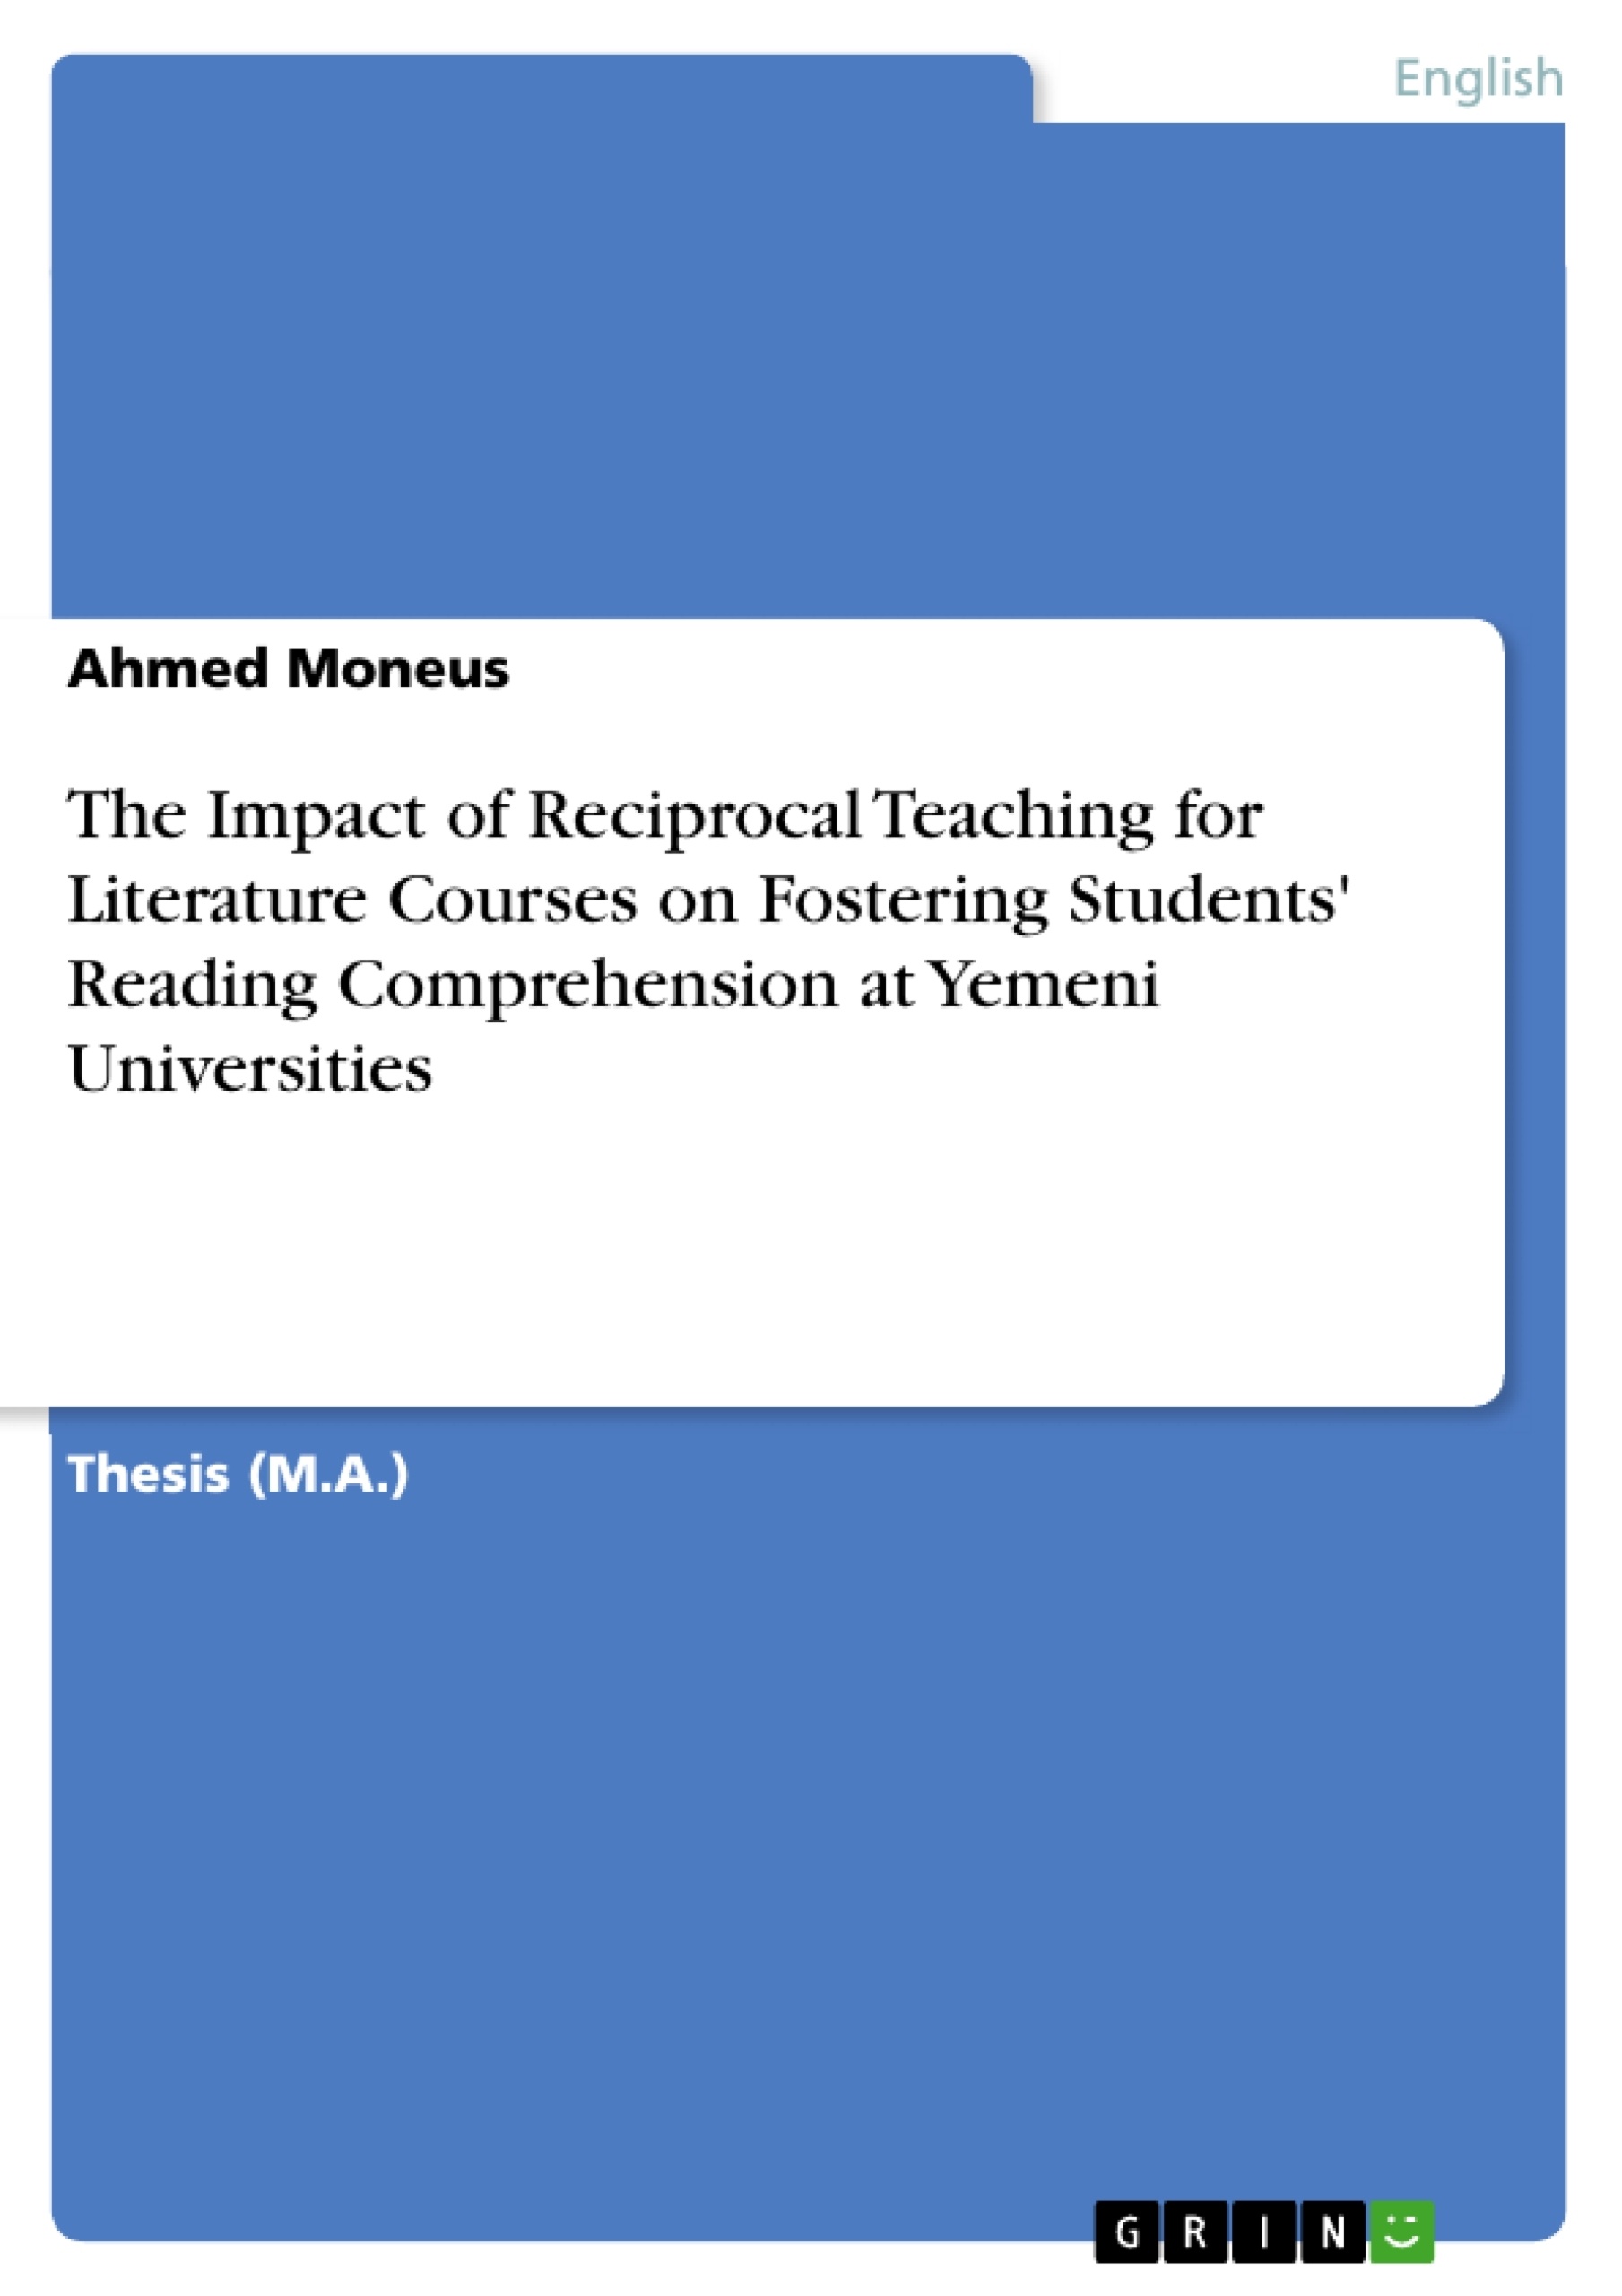 Titre: The Impact of Reciprocal Teaching for Literature Courses on Fostering Students' Reading Comprehension at Yemeni Universities